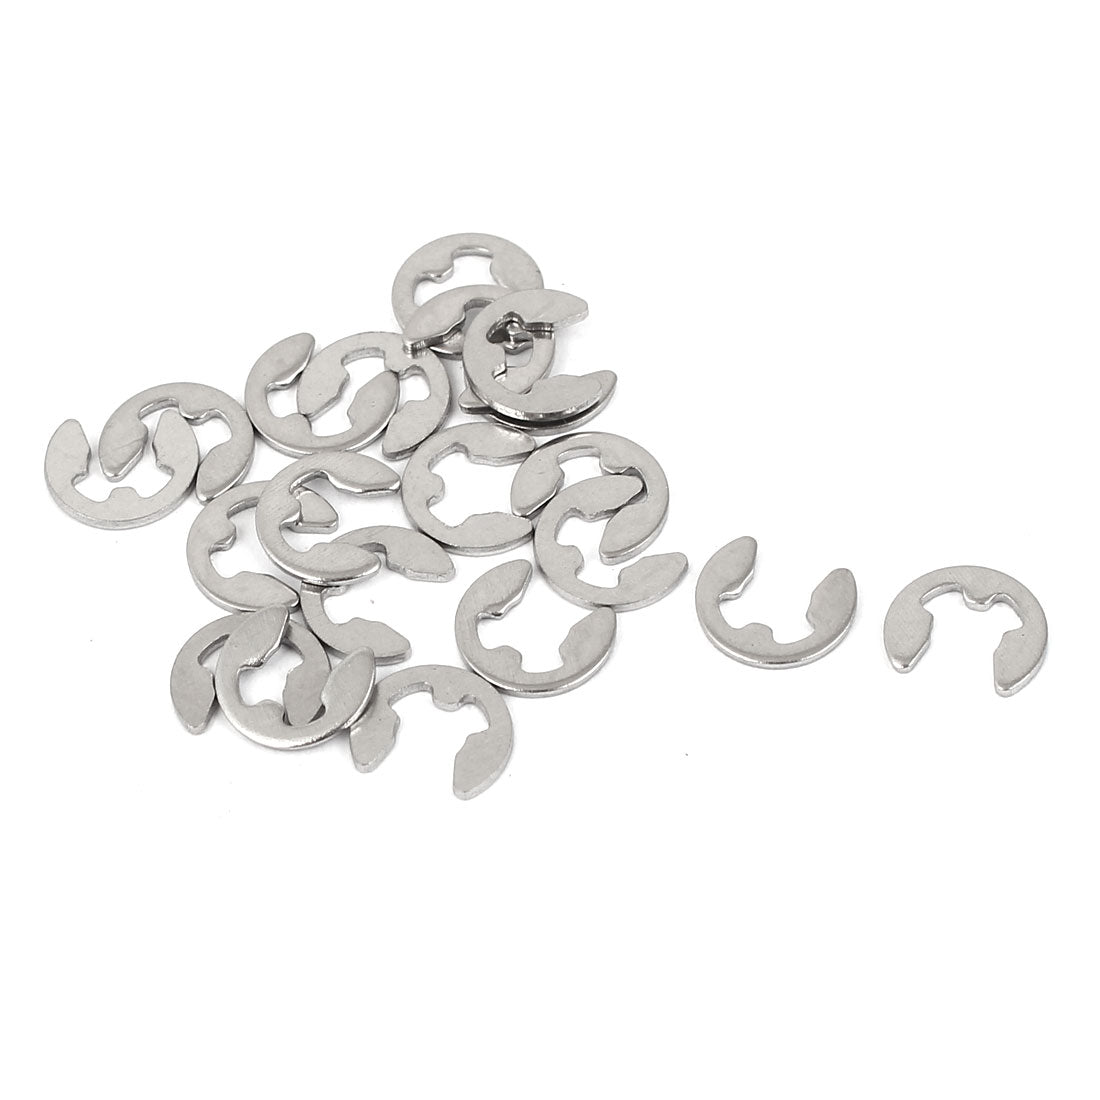 Uxcell Uxcell 20pcs 304 Stainless Steel Fastener External Retaining Ring E-Clip Circlip 4mm